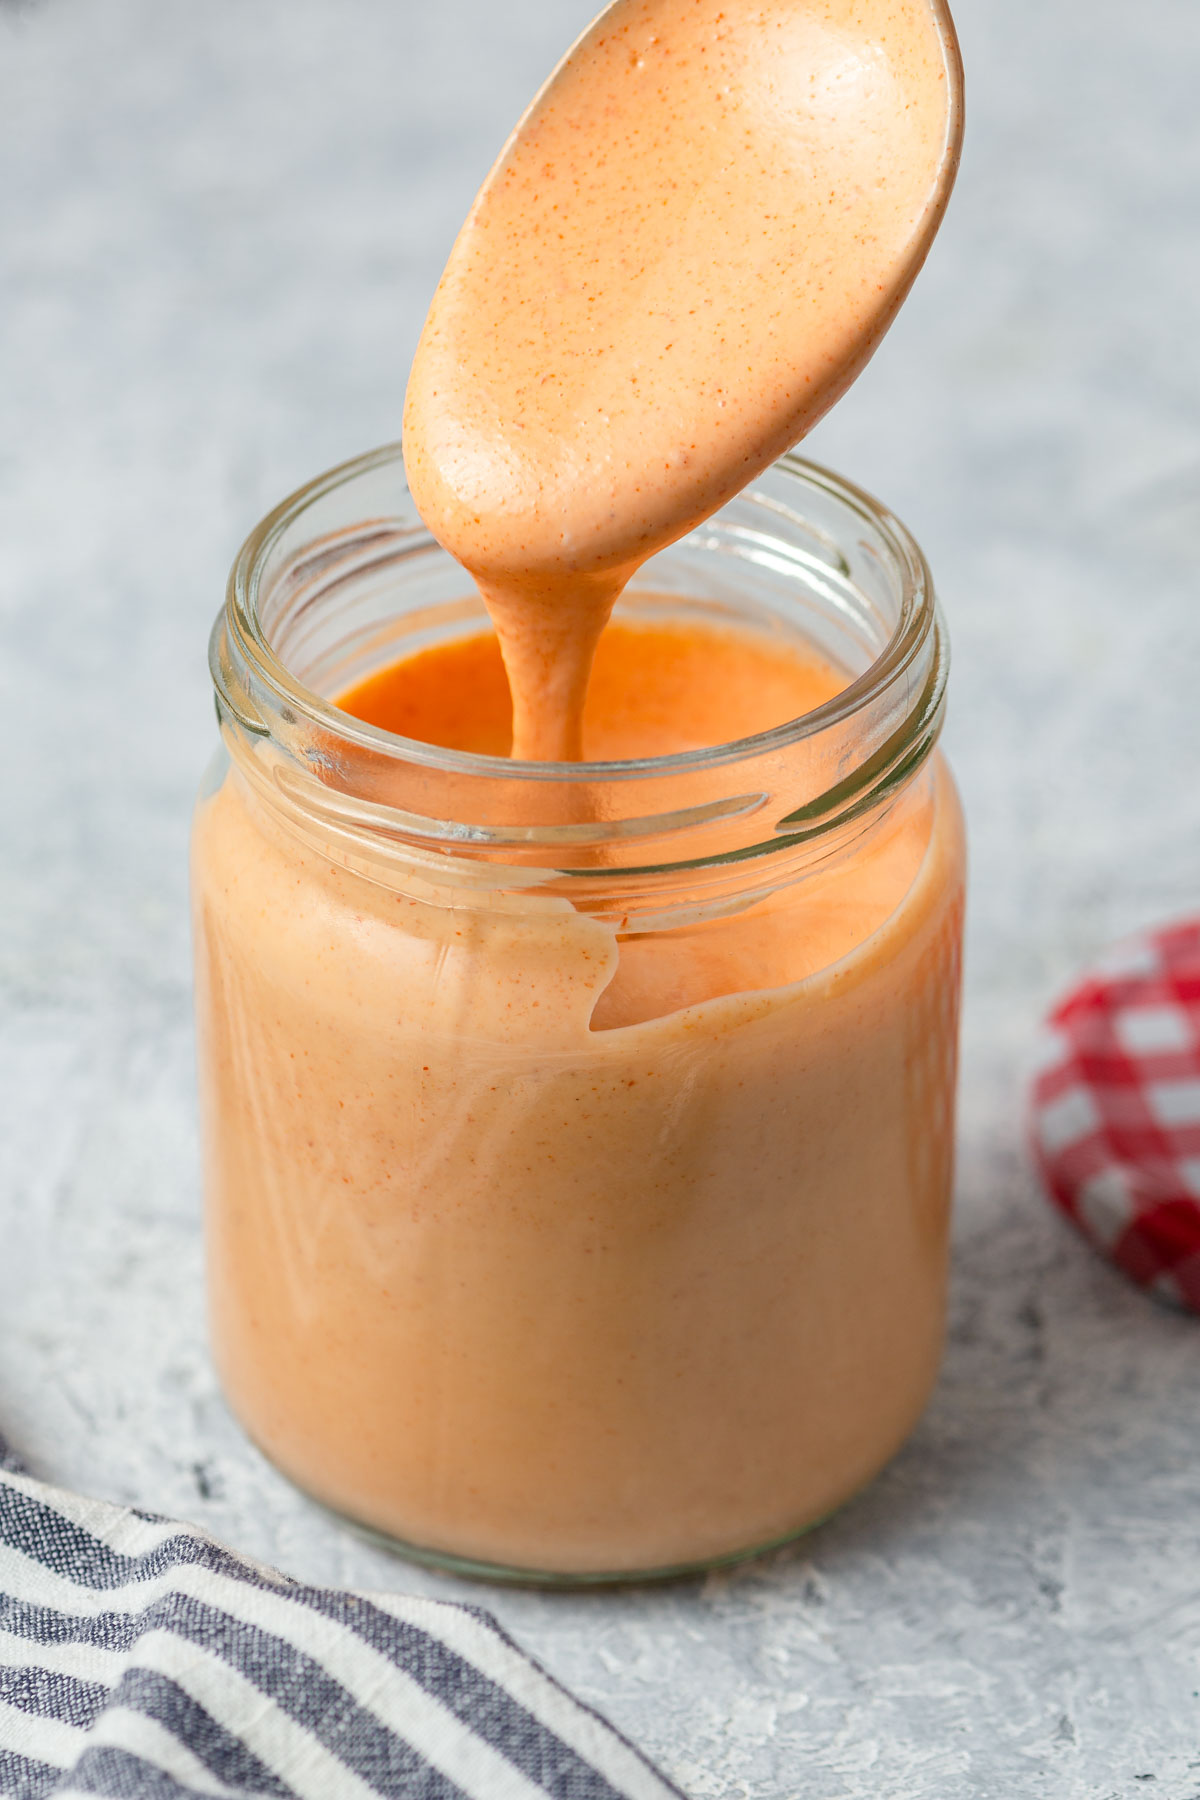 spicy mayo sauce recipe in a jar with a spoon.